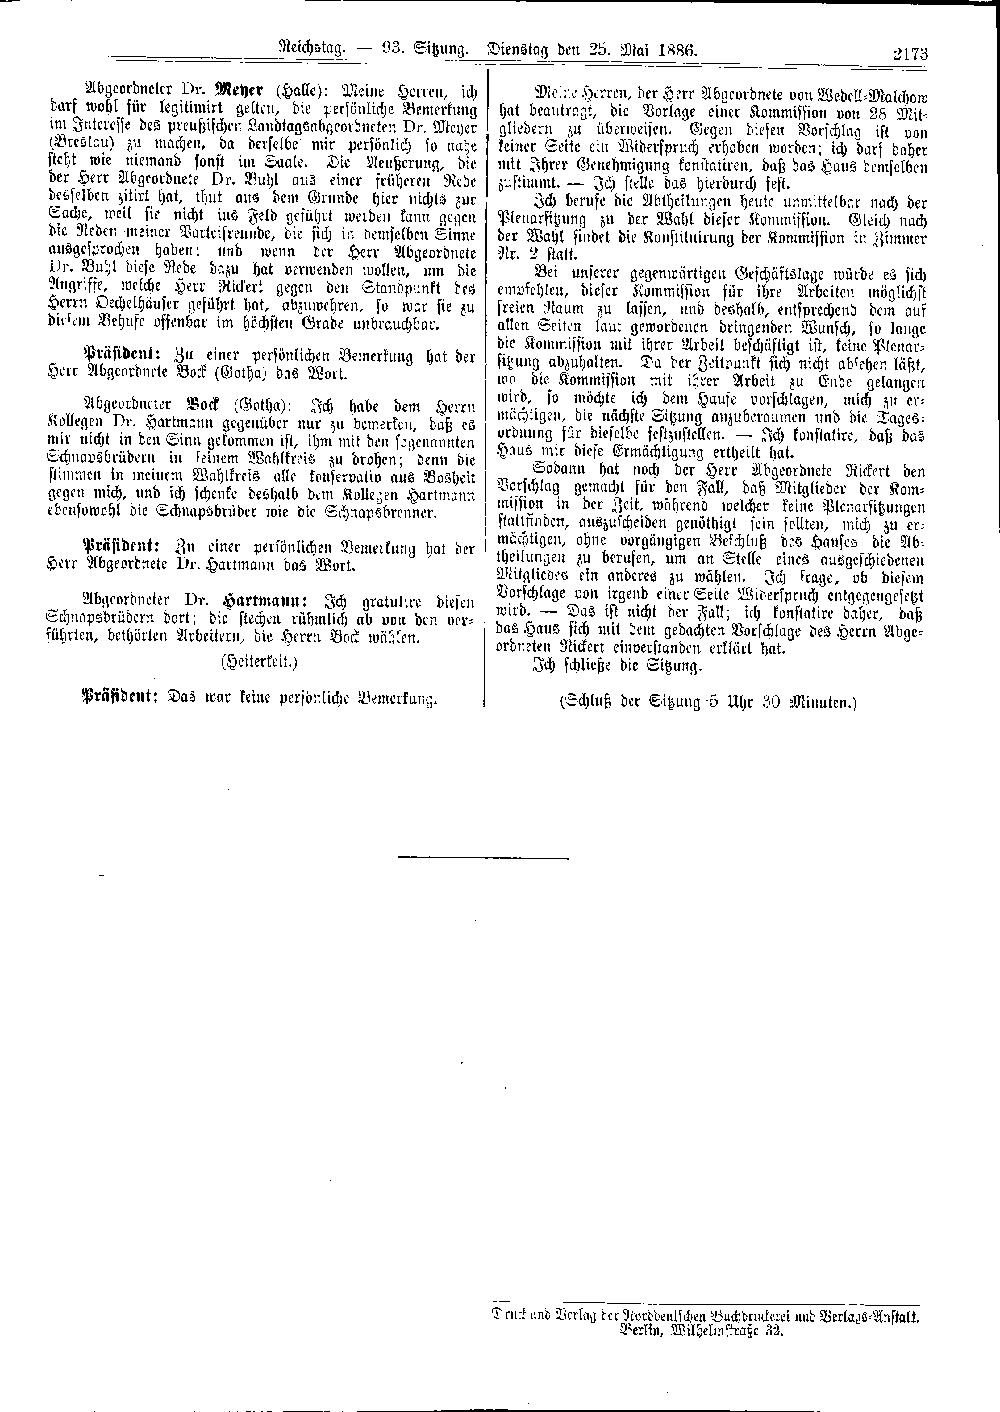 Scan of page 2173